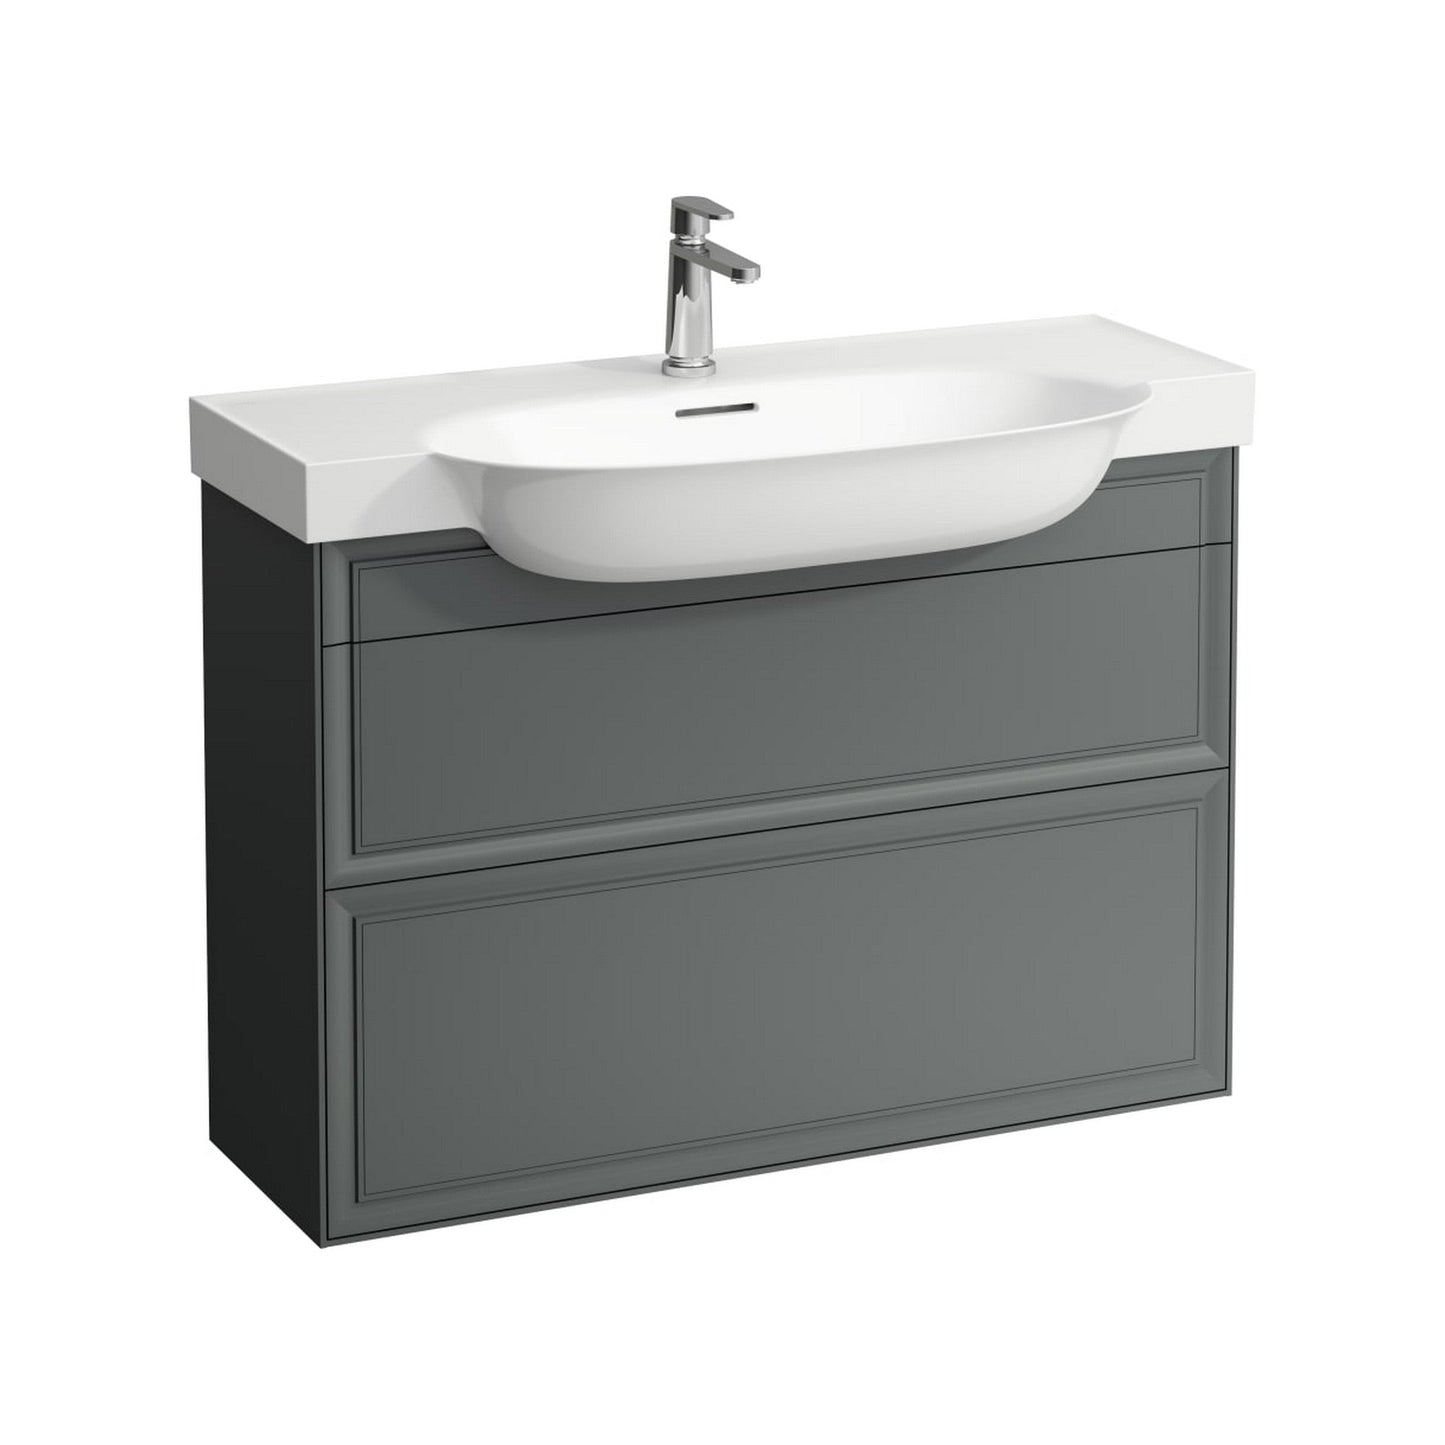 Laufen New Classic 38" 2-Drawer Traffic Gray Wall-Mounted Vanity for New Classic Bathroom Sink Model: H81387